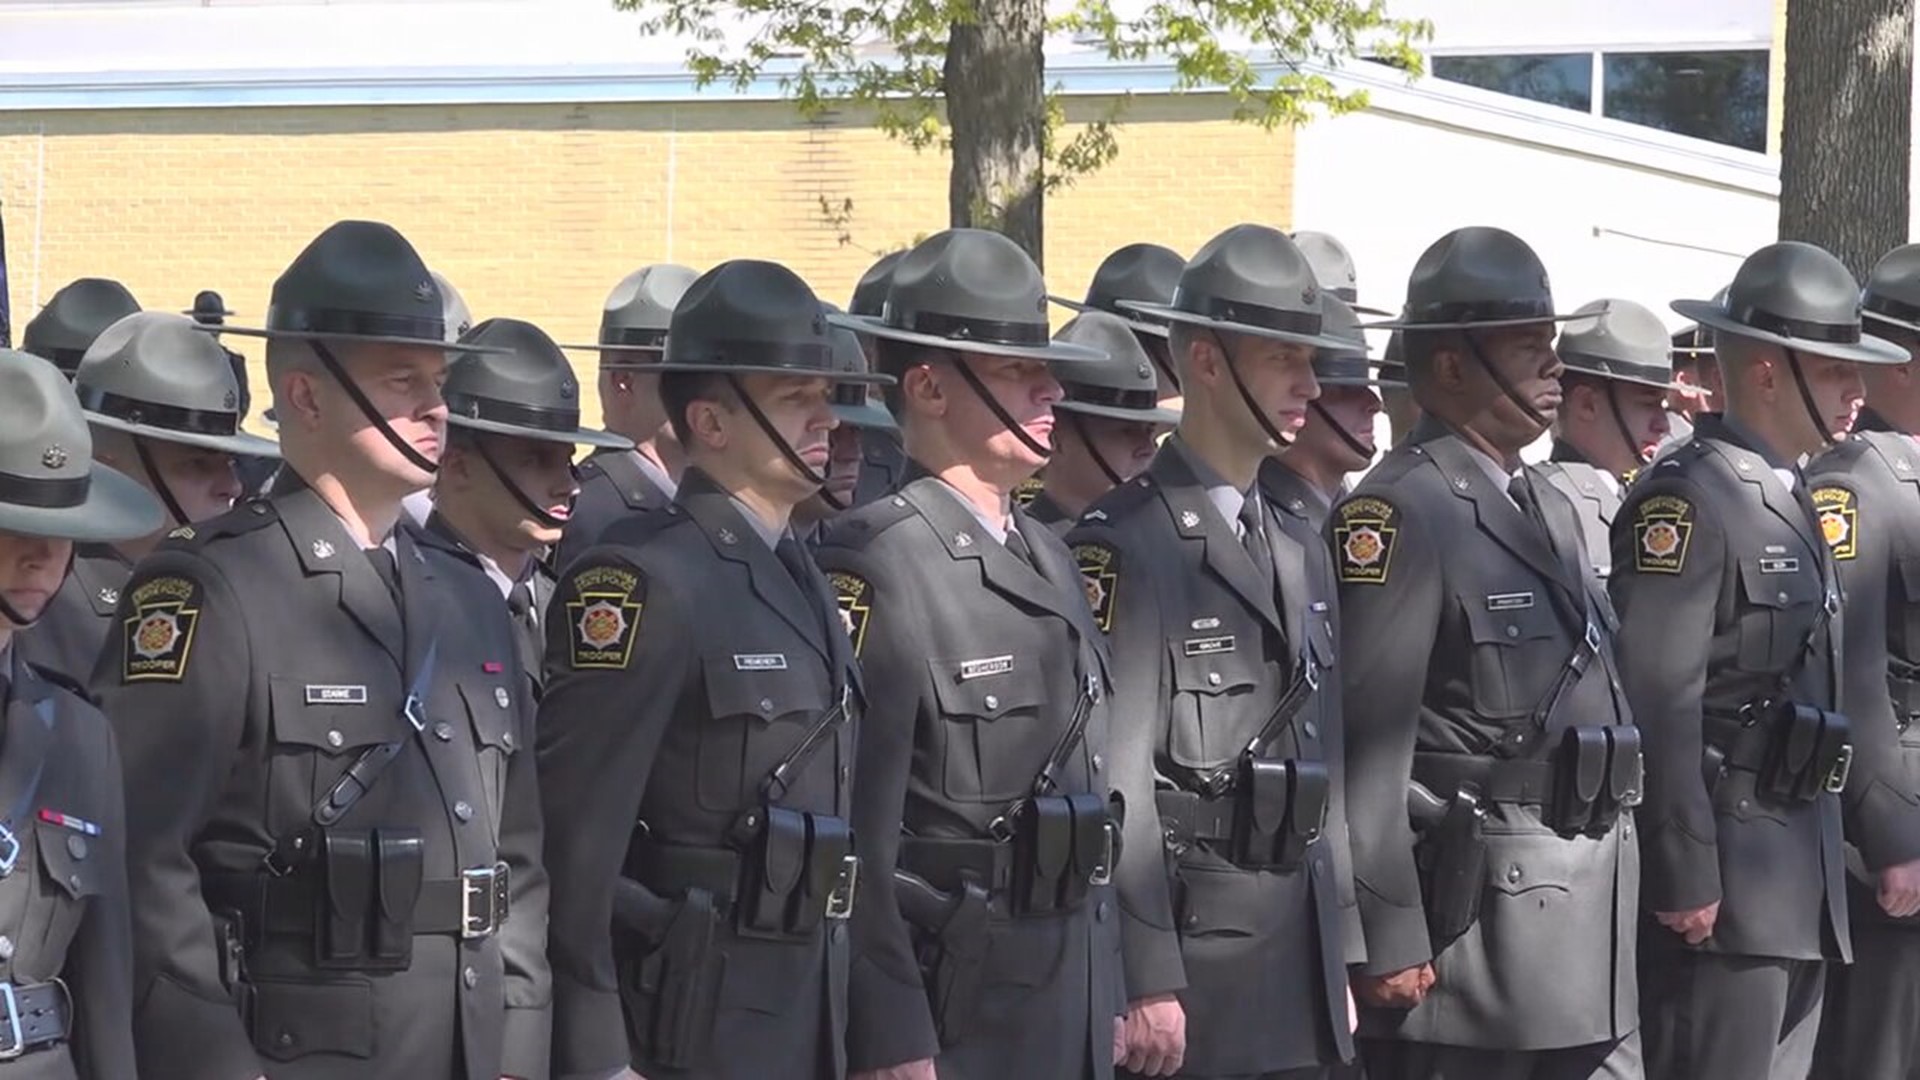 In just one month since dropping the 60 college credit requirement, Pennsylvania State Police received over 1,200 new applications.